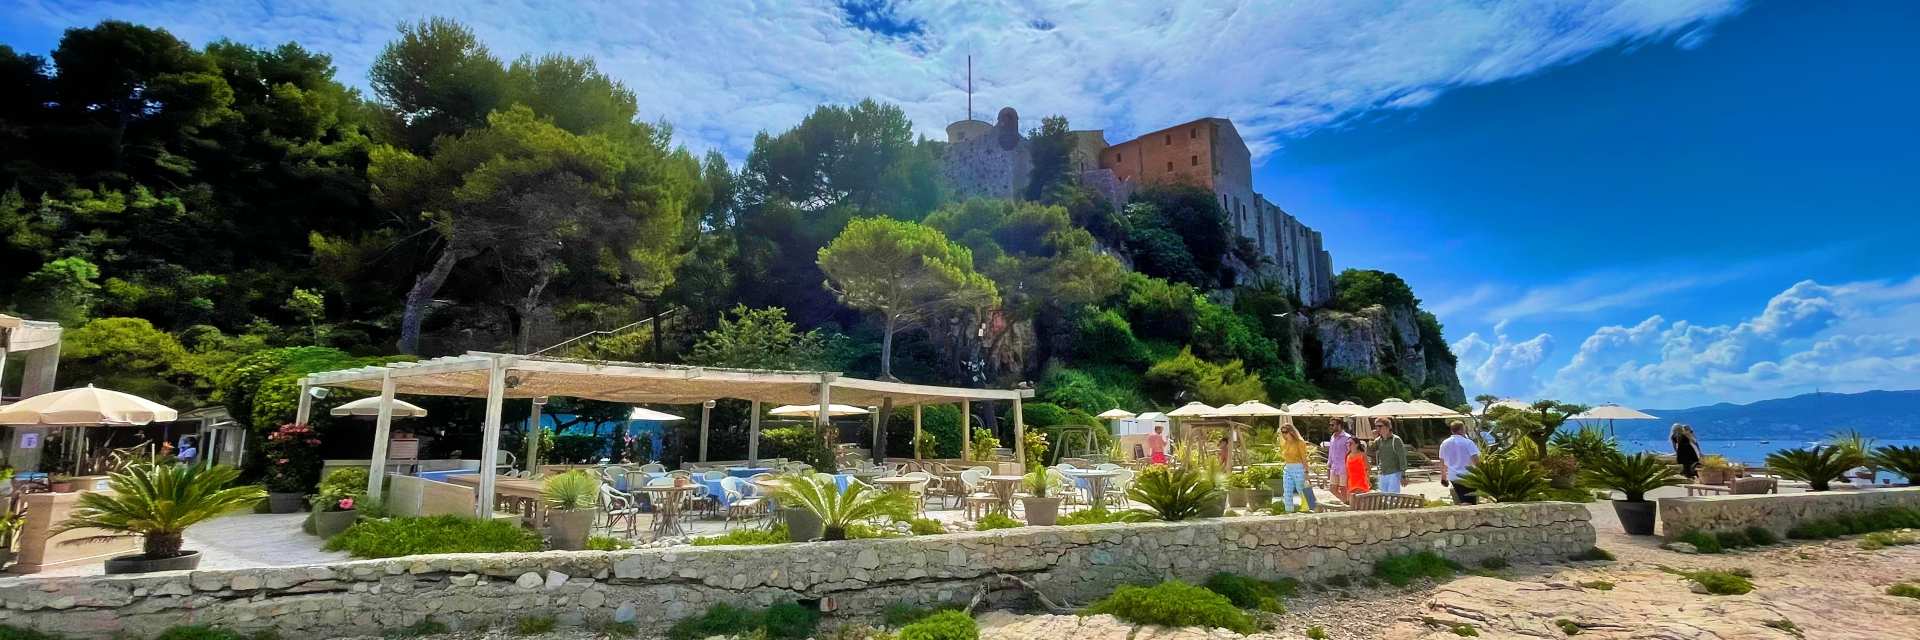 Fort Royal and restaurant La Guérite at the Marguerite Island, Cannes